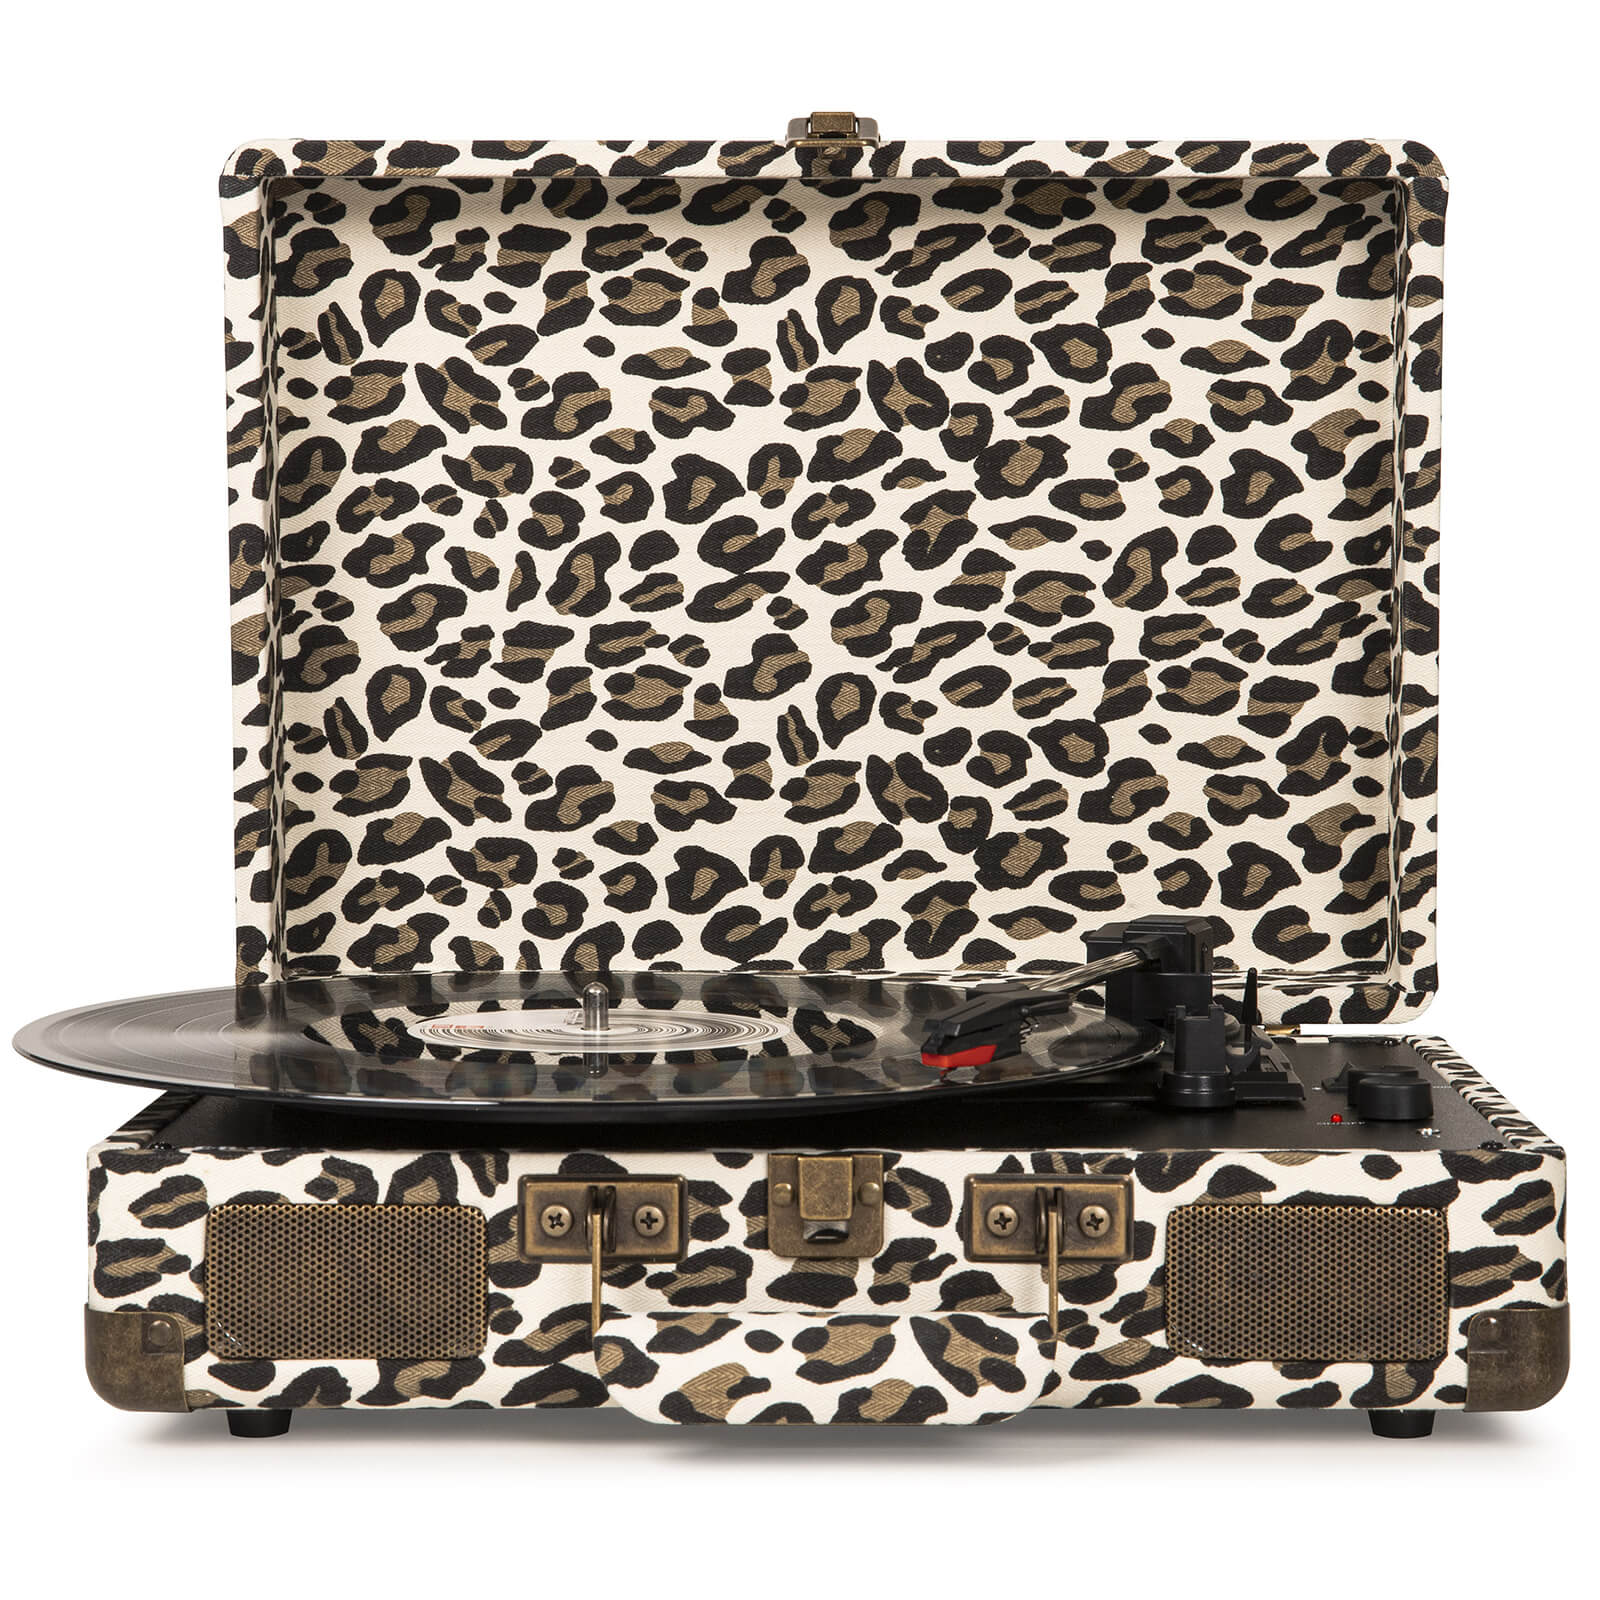 Cruiser Deluxe Portable Turntable (Leopard)